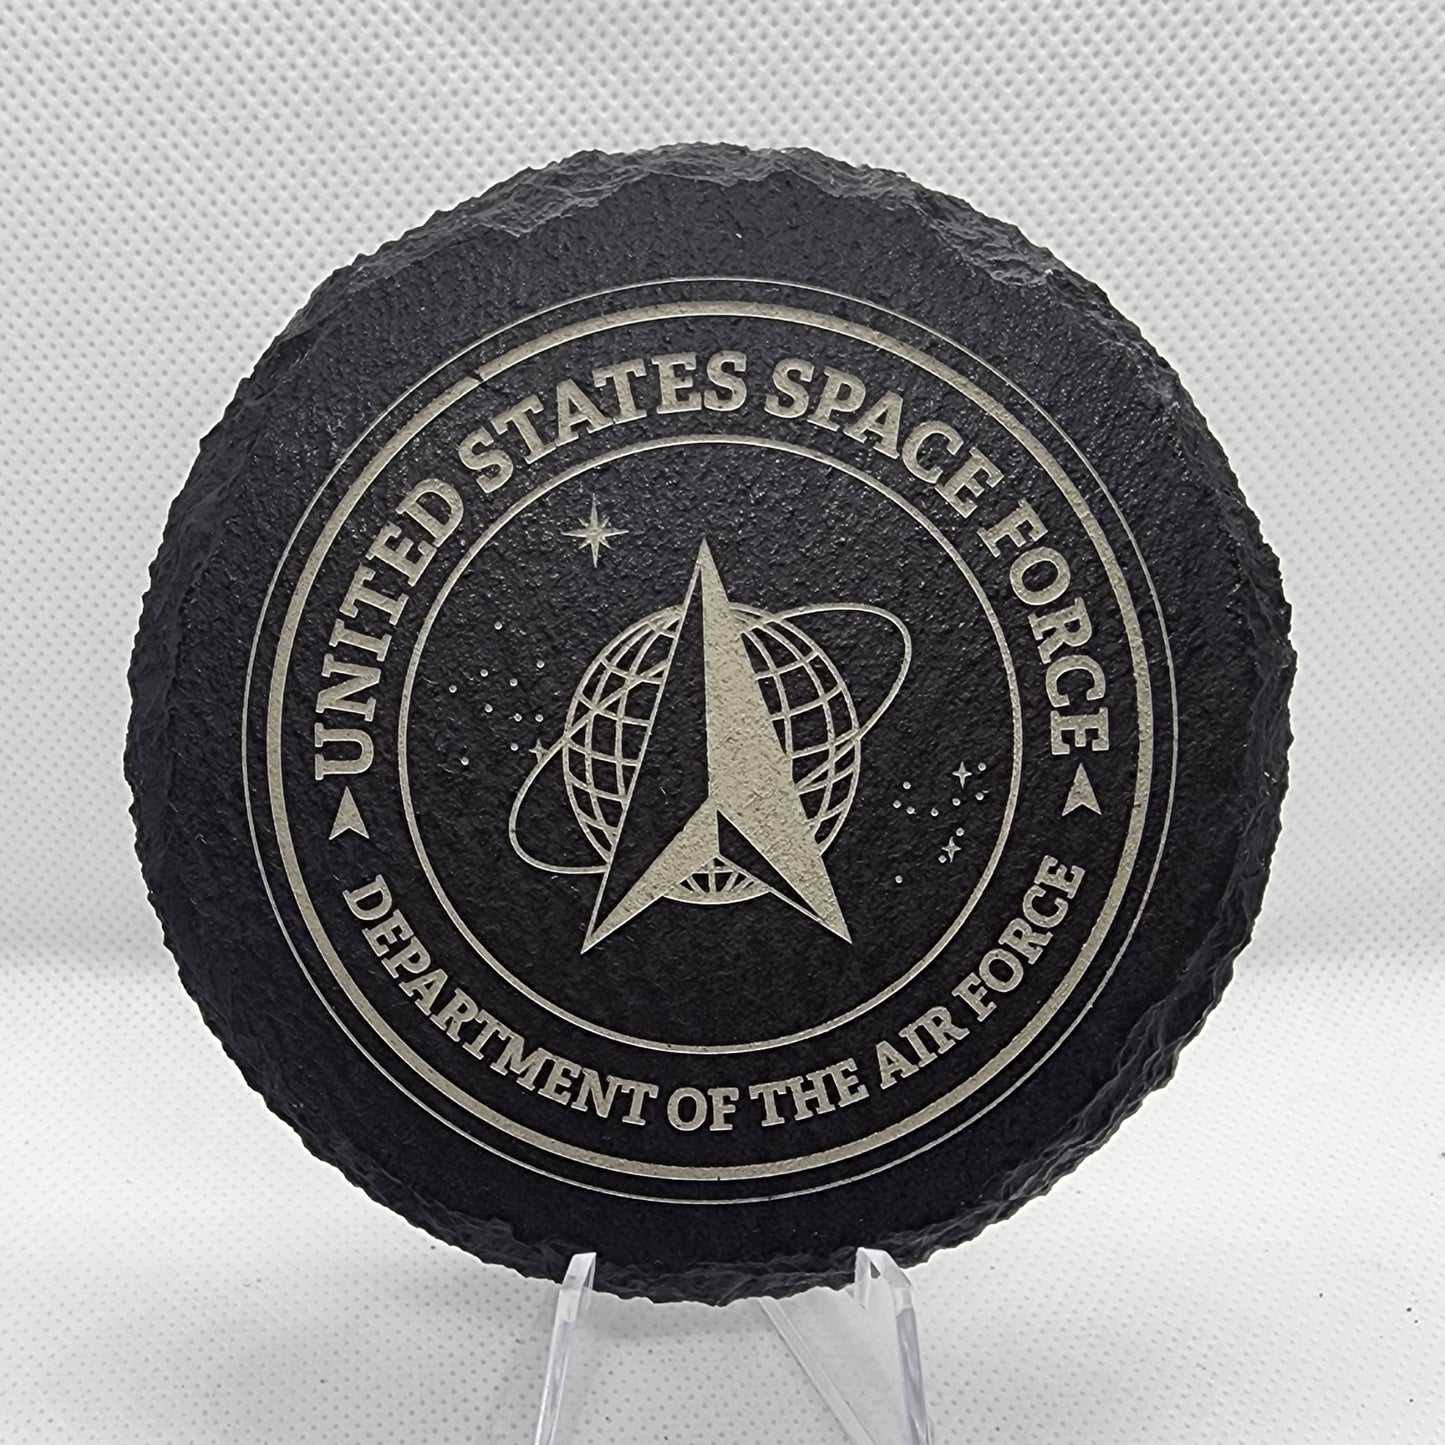 Coaster Set - US  Space Force  Collection